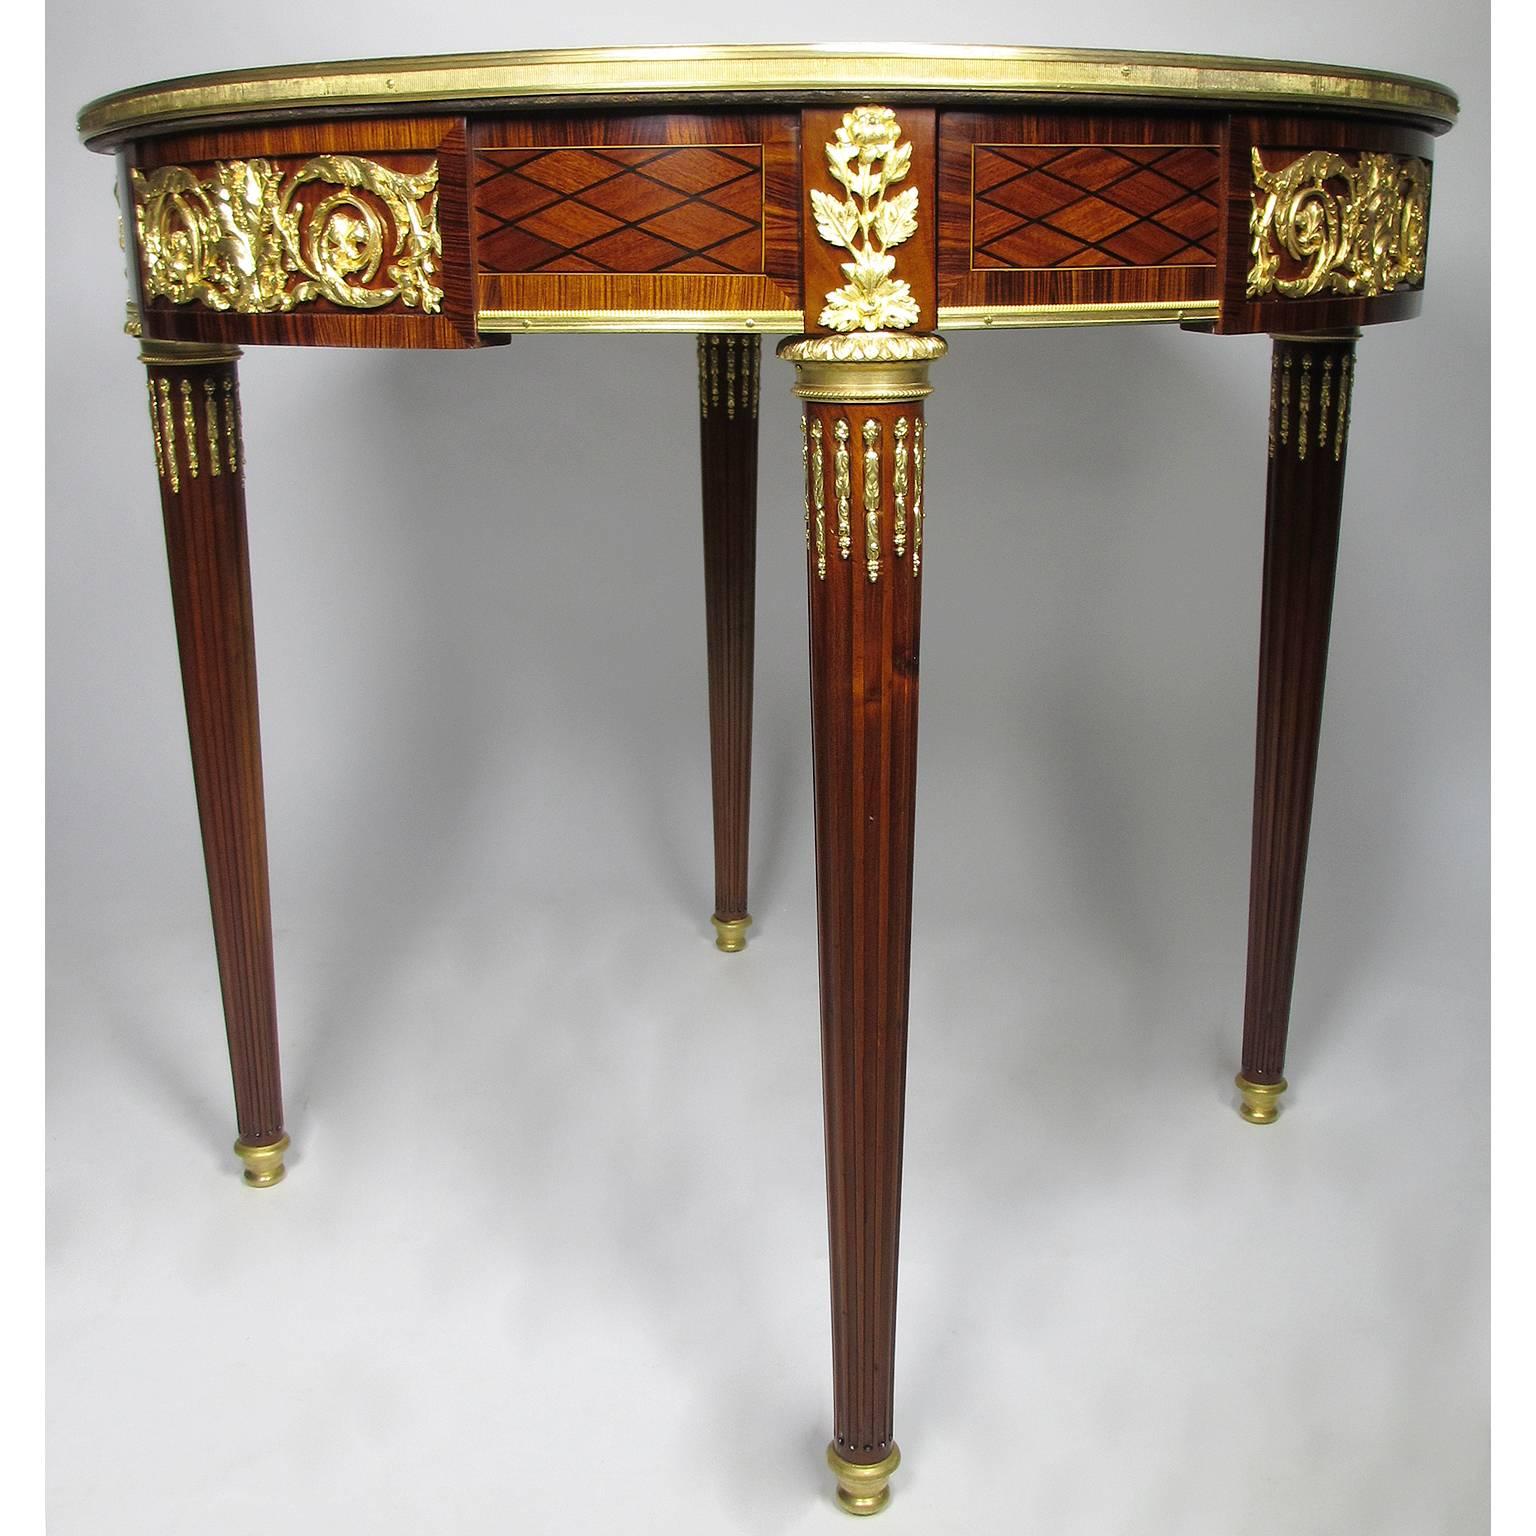 A French 19th-20th Century Louis XVI Style Ormolu-Mounted Guéridon Side Table For Sale 2